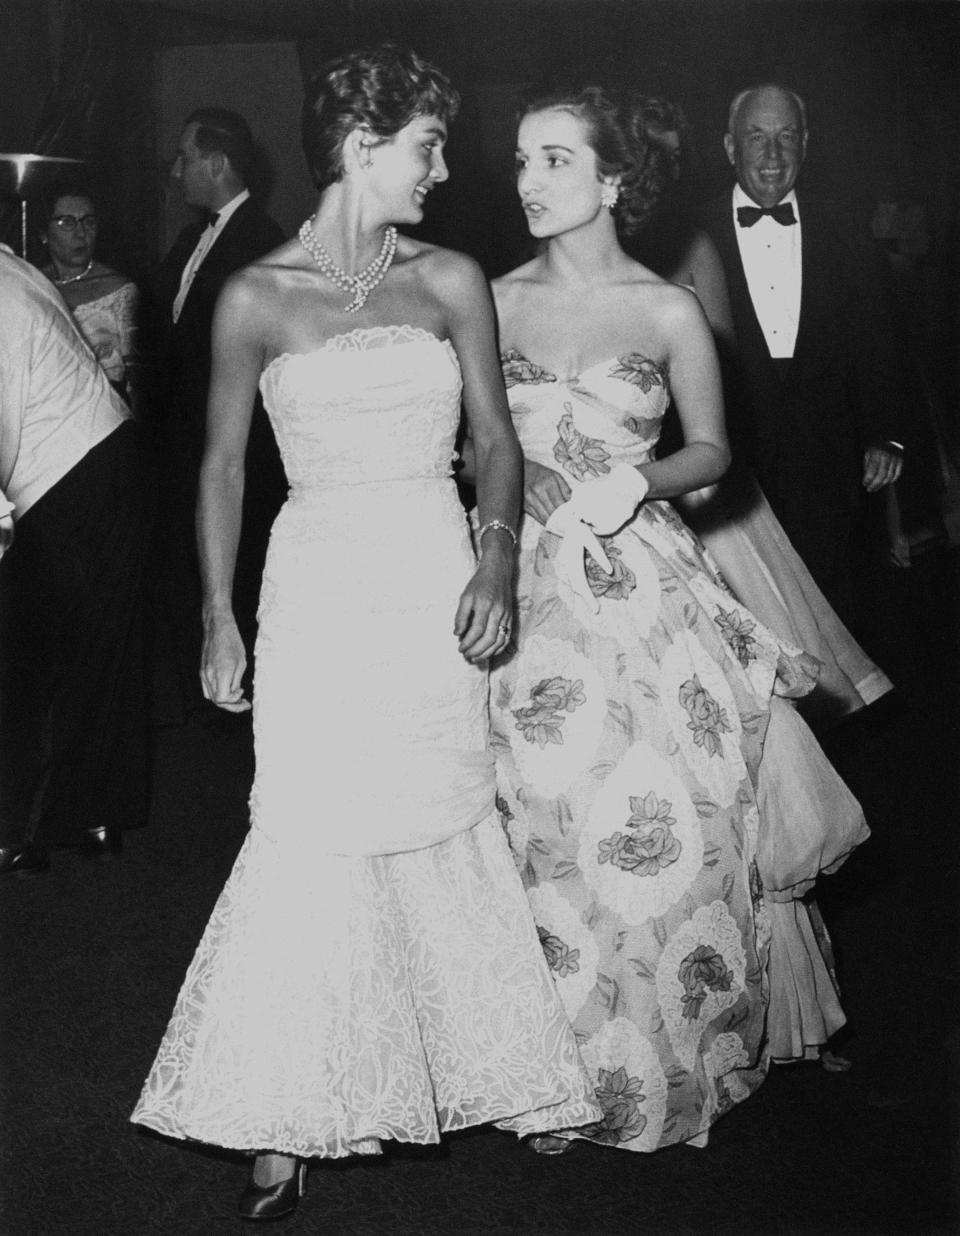 Kennedy and her sister attend the Franco-American Ball at the Waldorf Astoria.